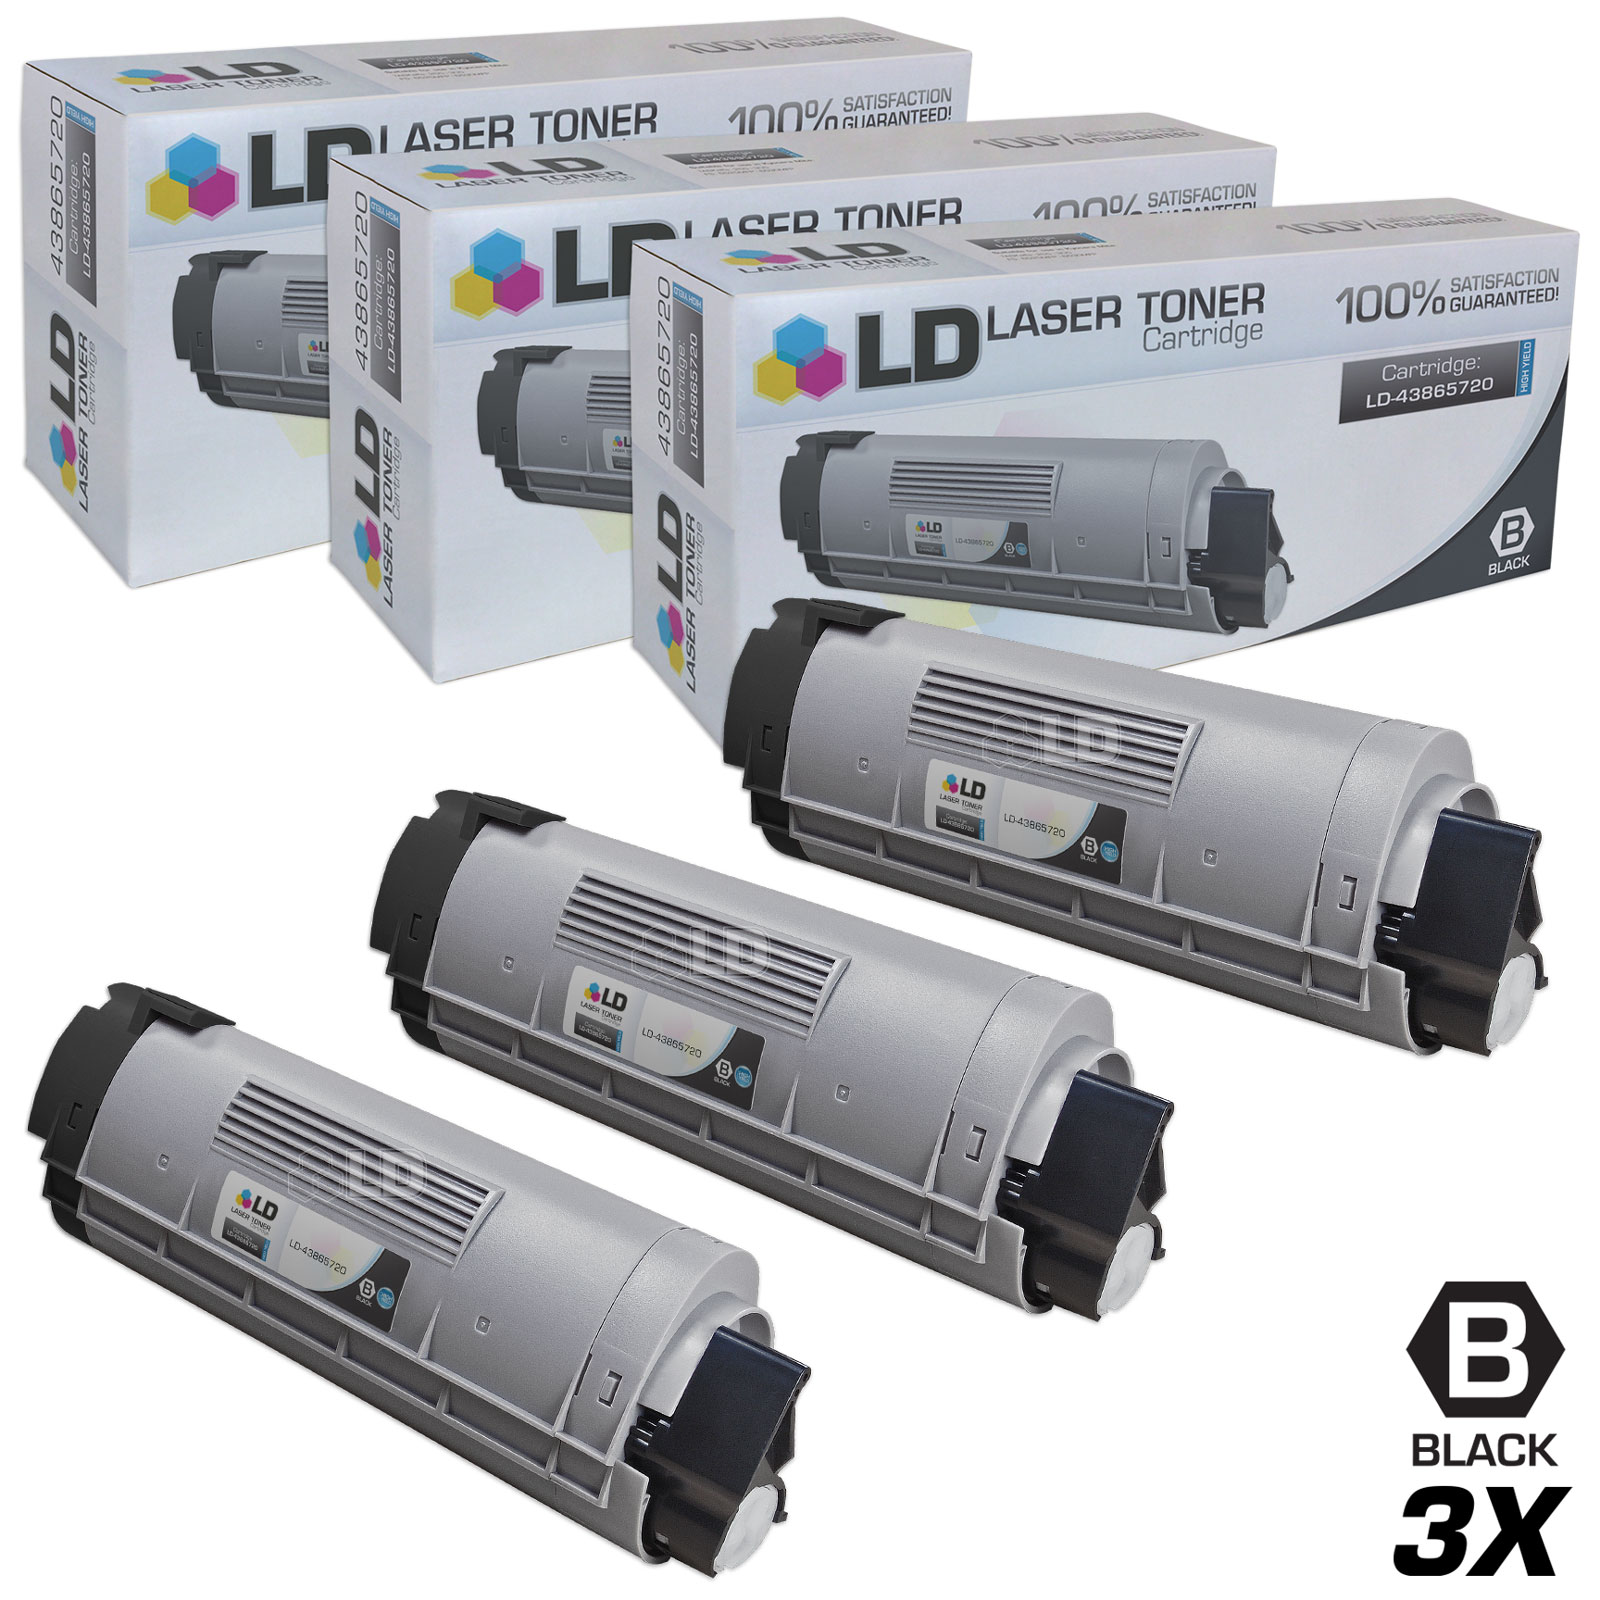 LD Compatible Replacements for Okidata 43865720 Set of 3 High Yield Black Laser Toner Cartridges for use in Okidata OKI C6150dn, C6150dtn, C6150hdn, C6150n, and MC560 MFP s - image 1 of 1